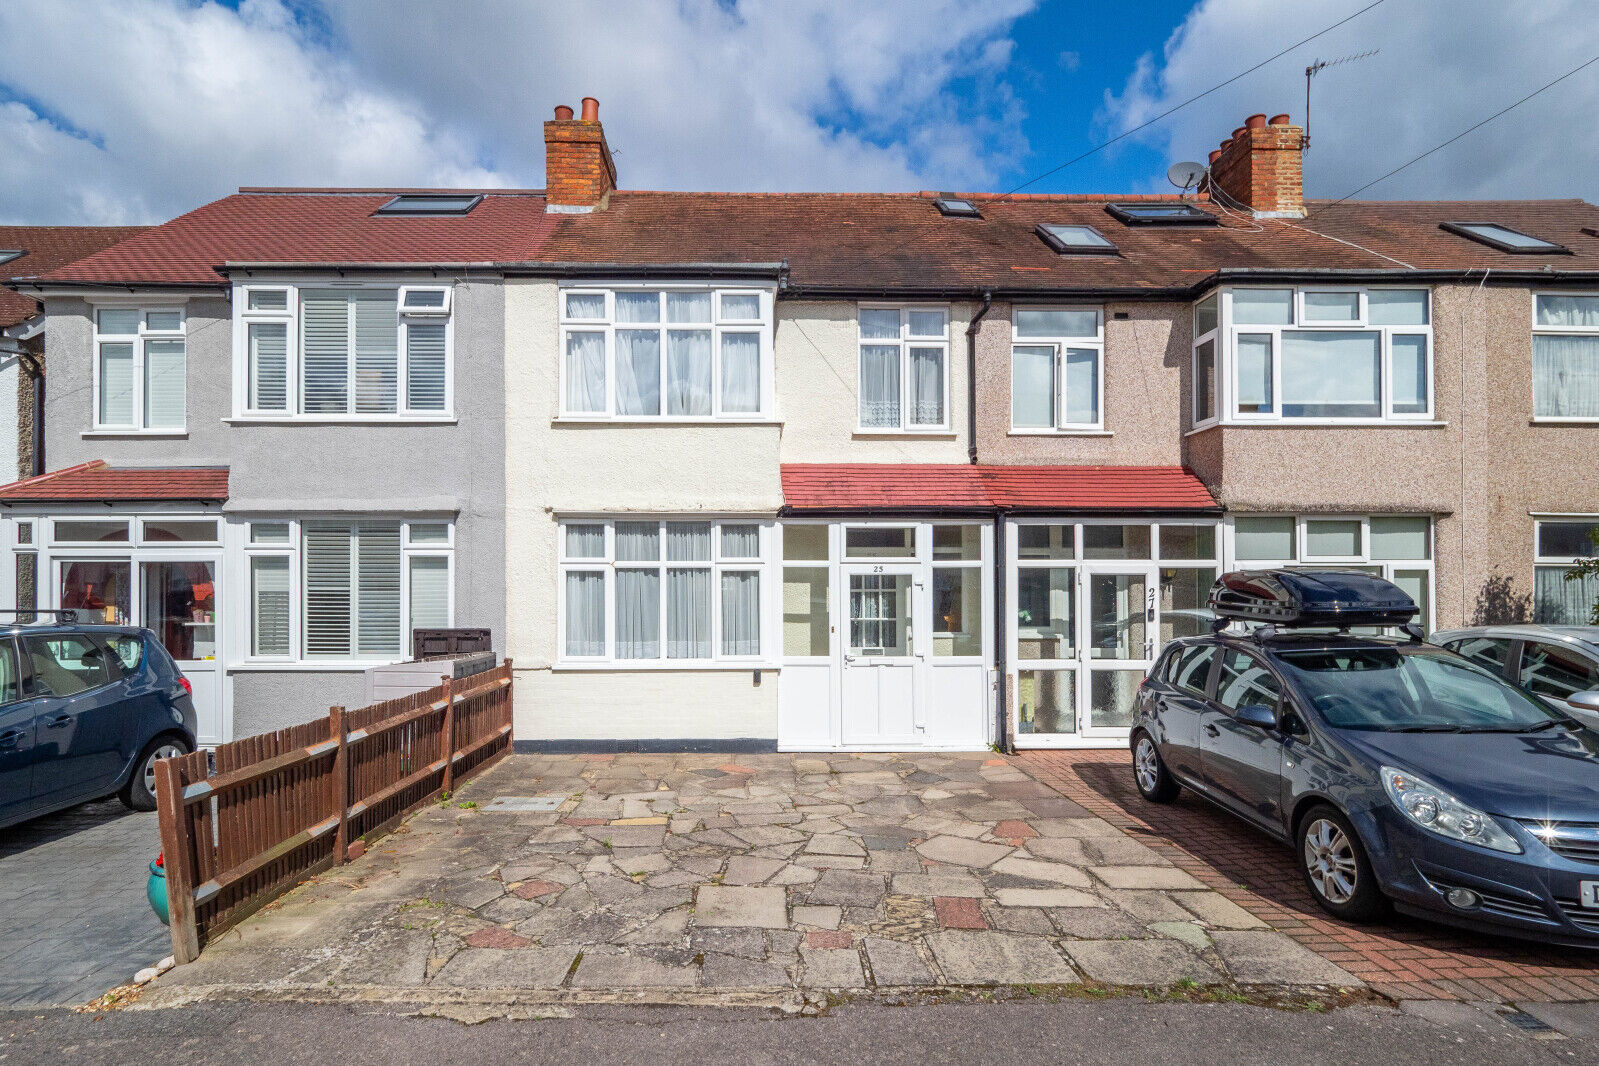 3 bedroom mid terraced house for sale Morley Road, Sutton, SM3, main image